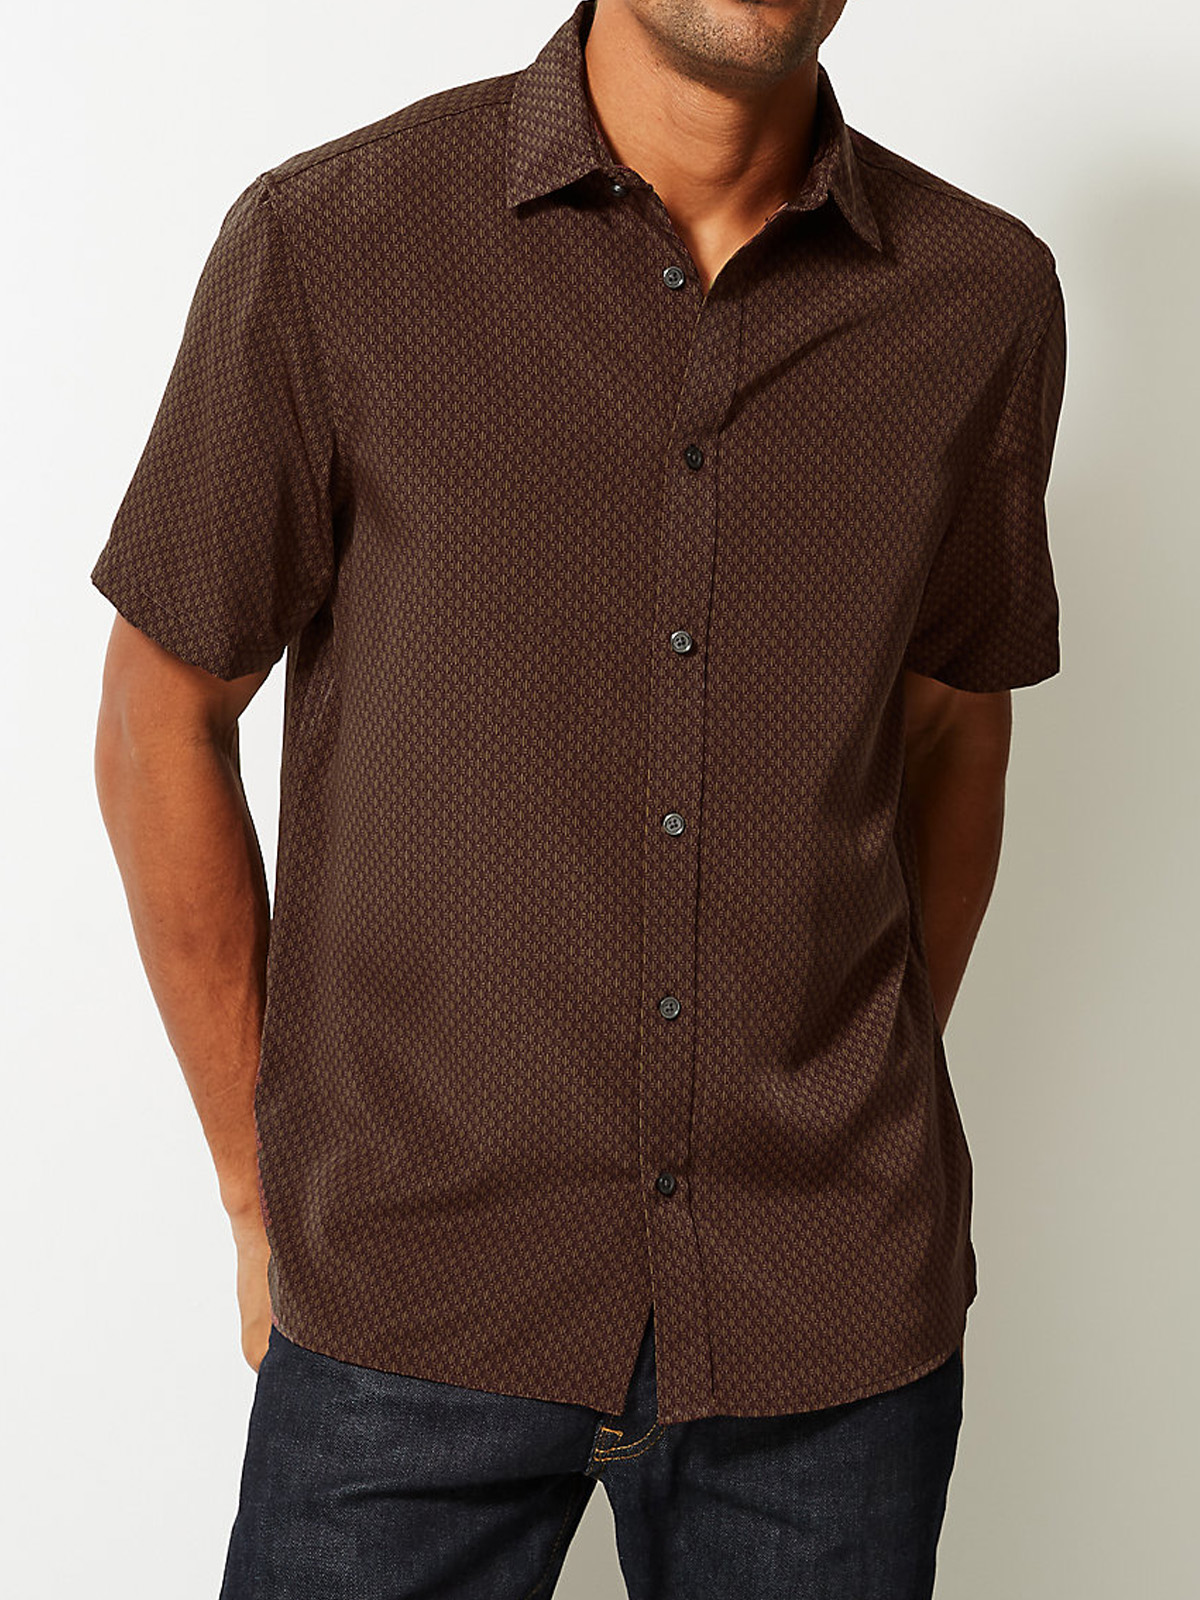 Marks and Spencer - - M&5 BROWN Mens Pure Cotton Geo Print Short Sleeve ...